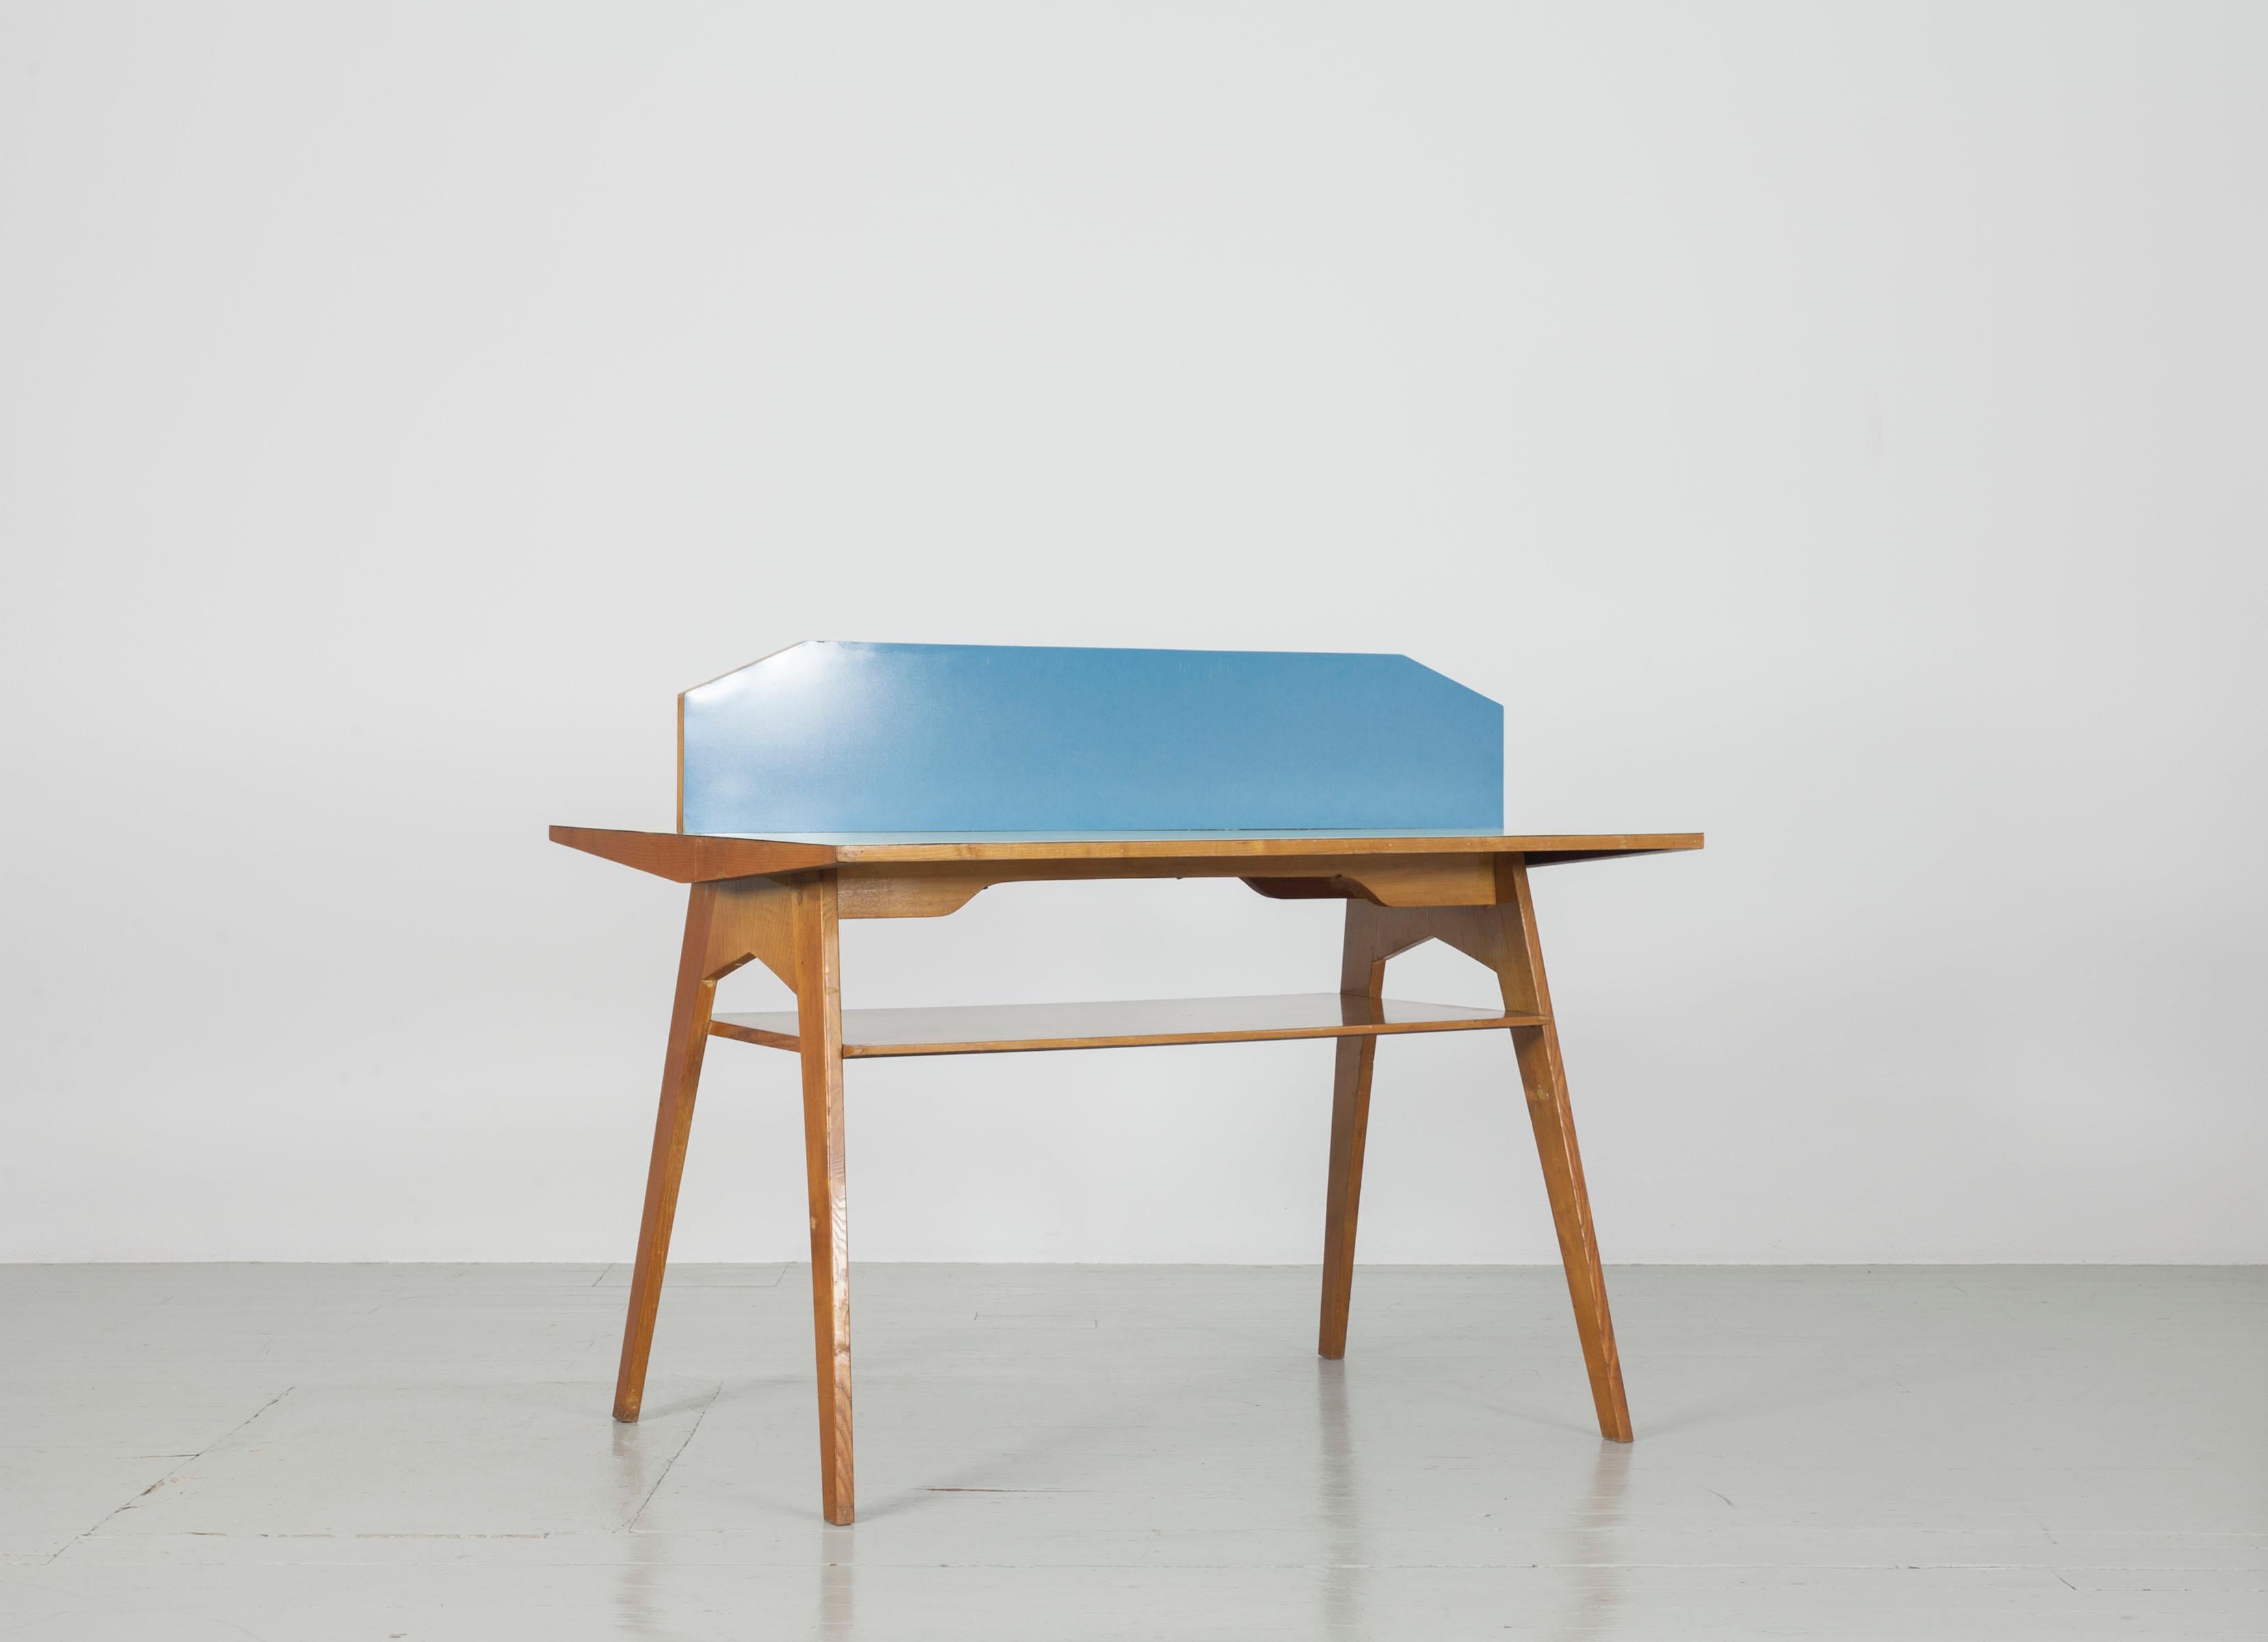 This Italian double desk was designed in the 1950s and consists mostly of maple wood. The yellow and blue coloured formica panels on the work surface and partition make the desk look playful and colourful, which is why it is an ideal piece of